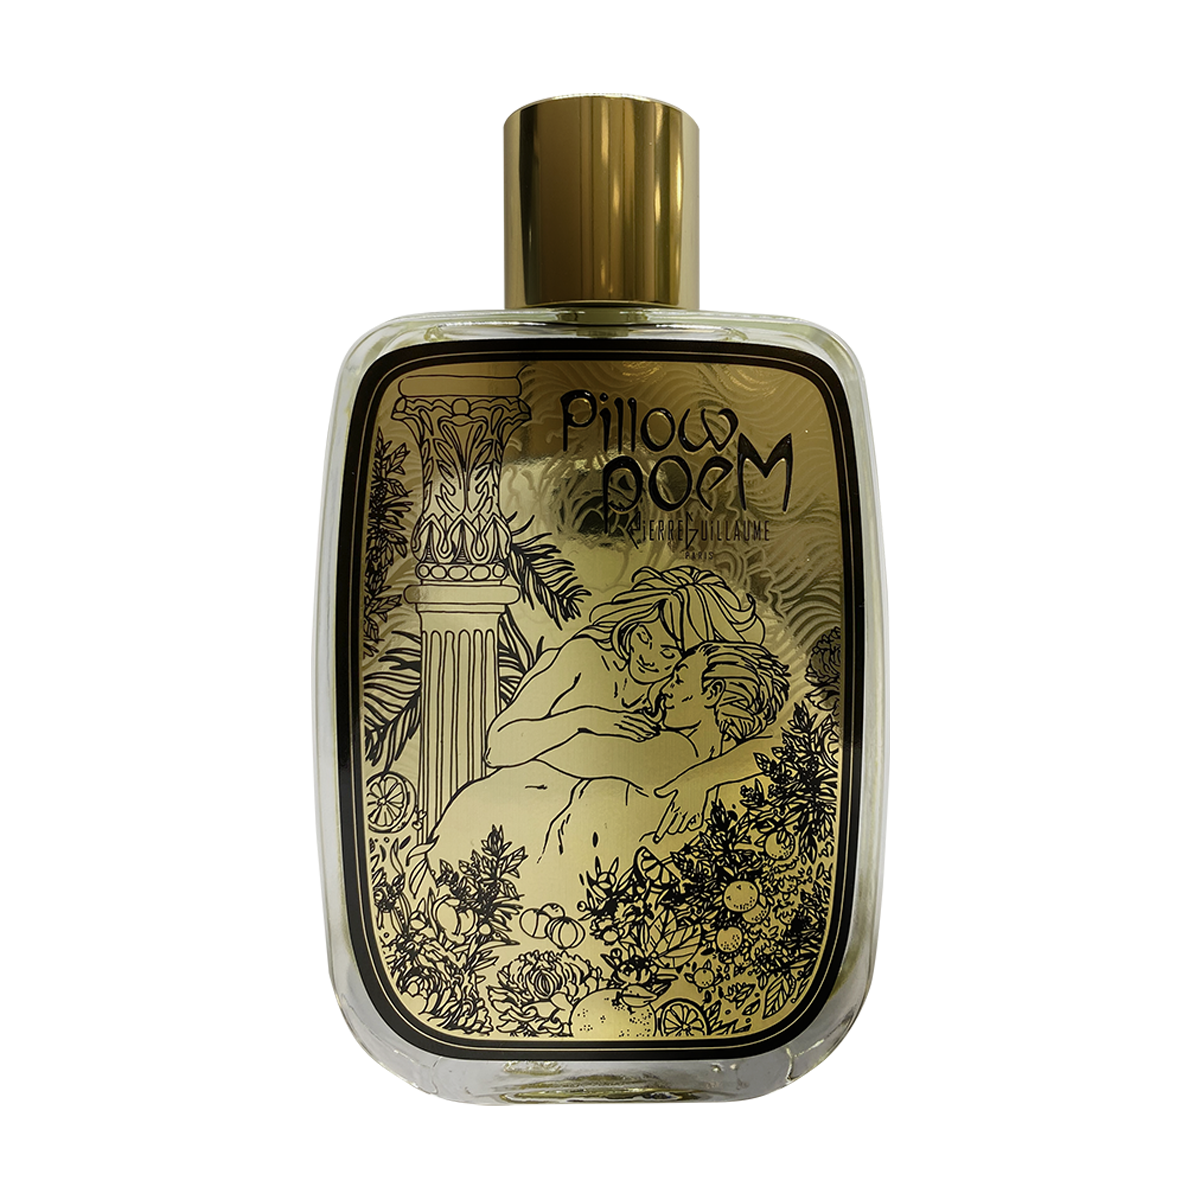 Pillowpoem Refreshing Perfume for Sheets and Room 100ml